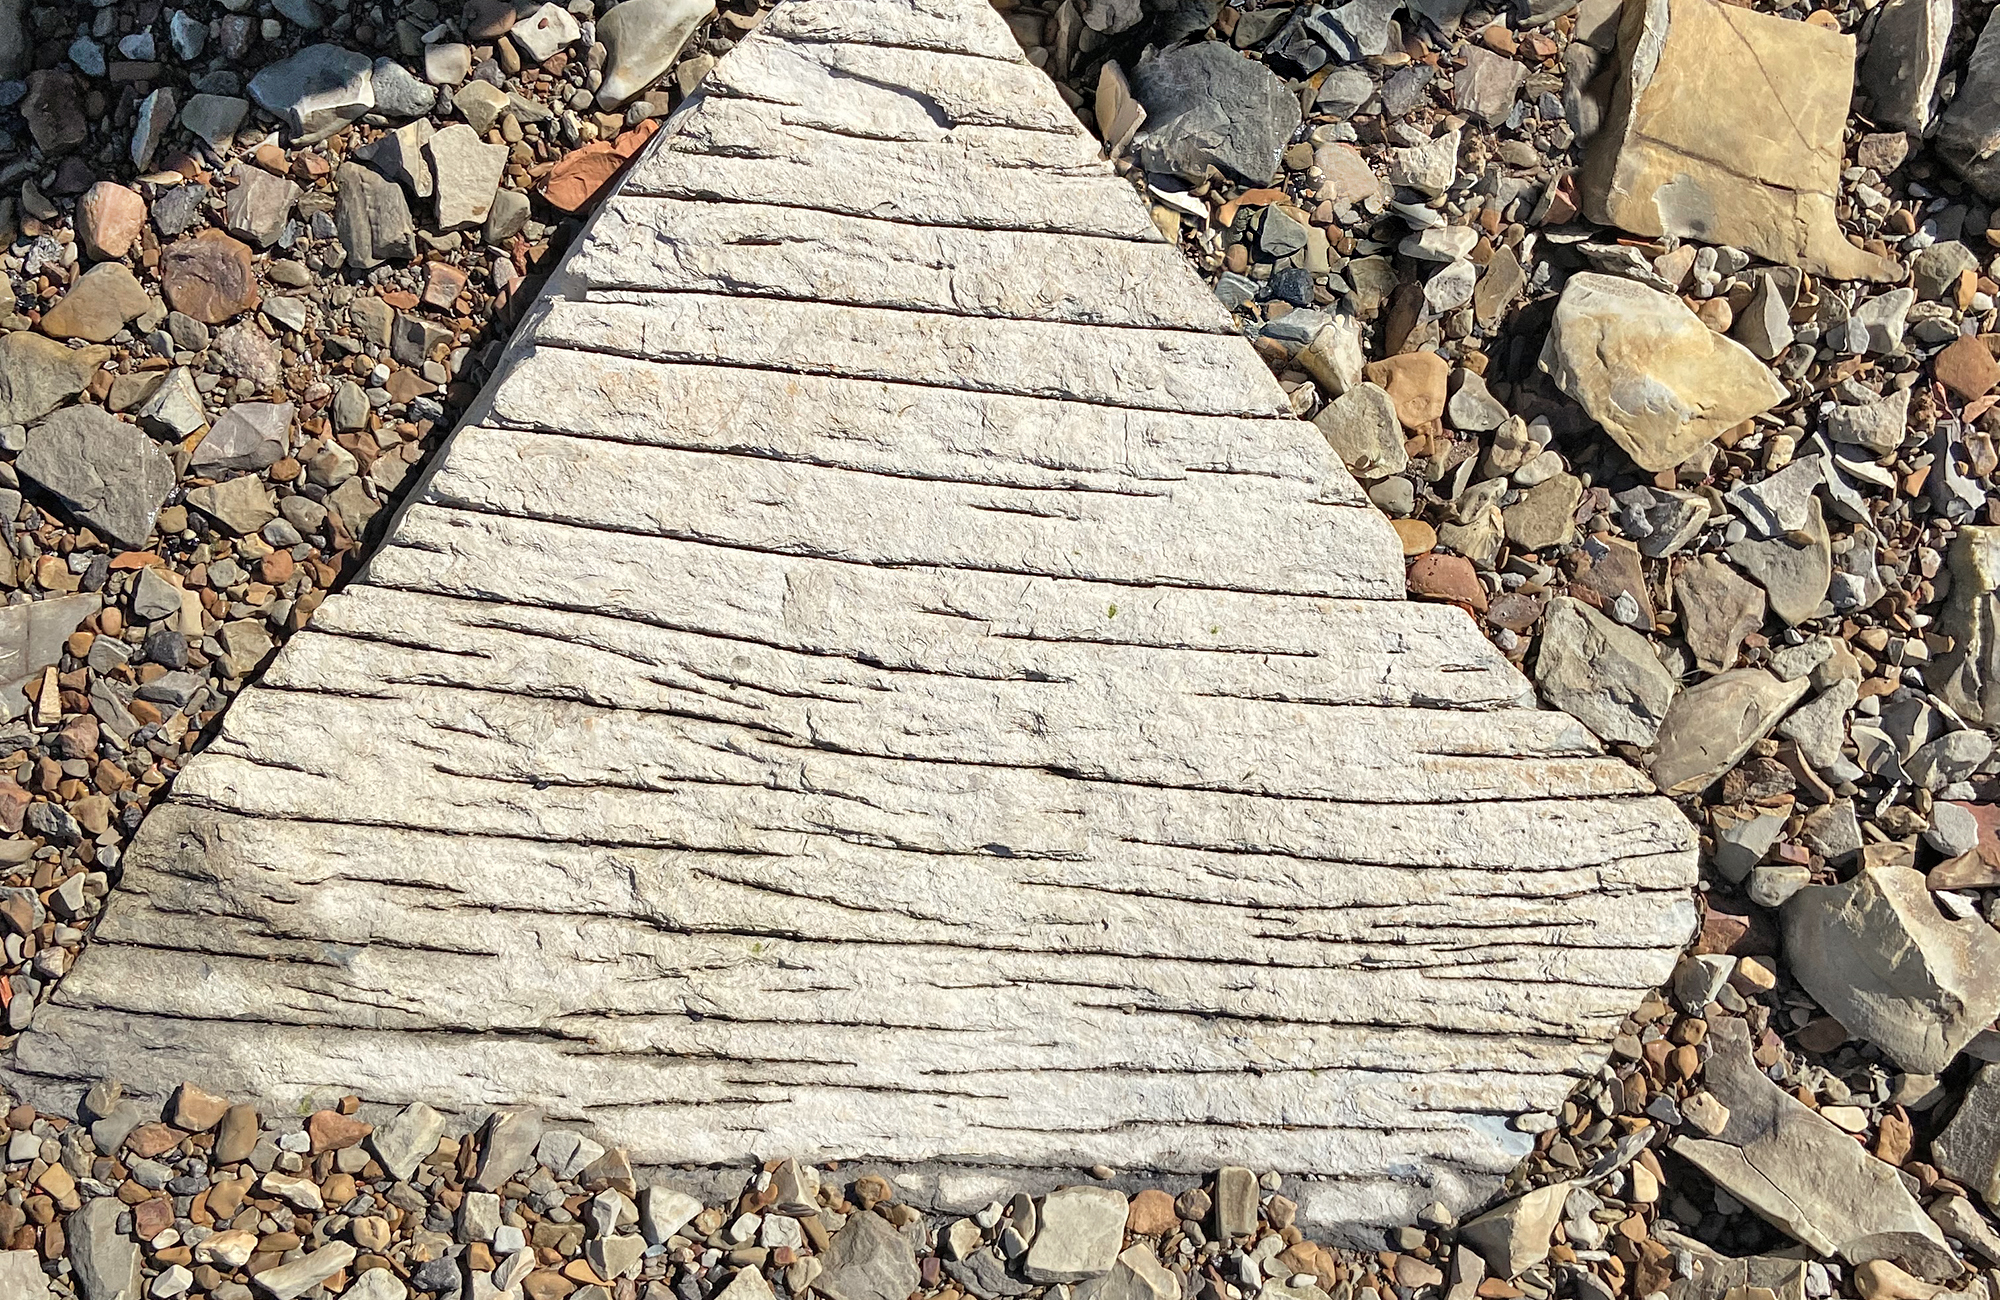 Rock in the shape of a triangle with many grooves cut into it.